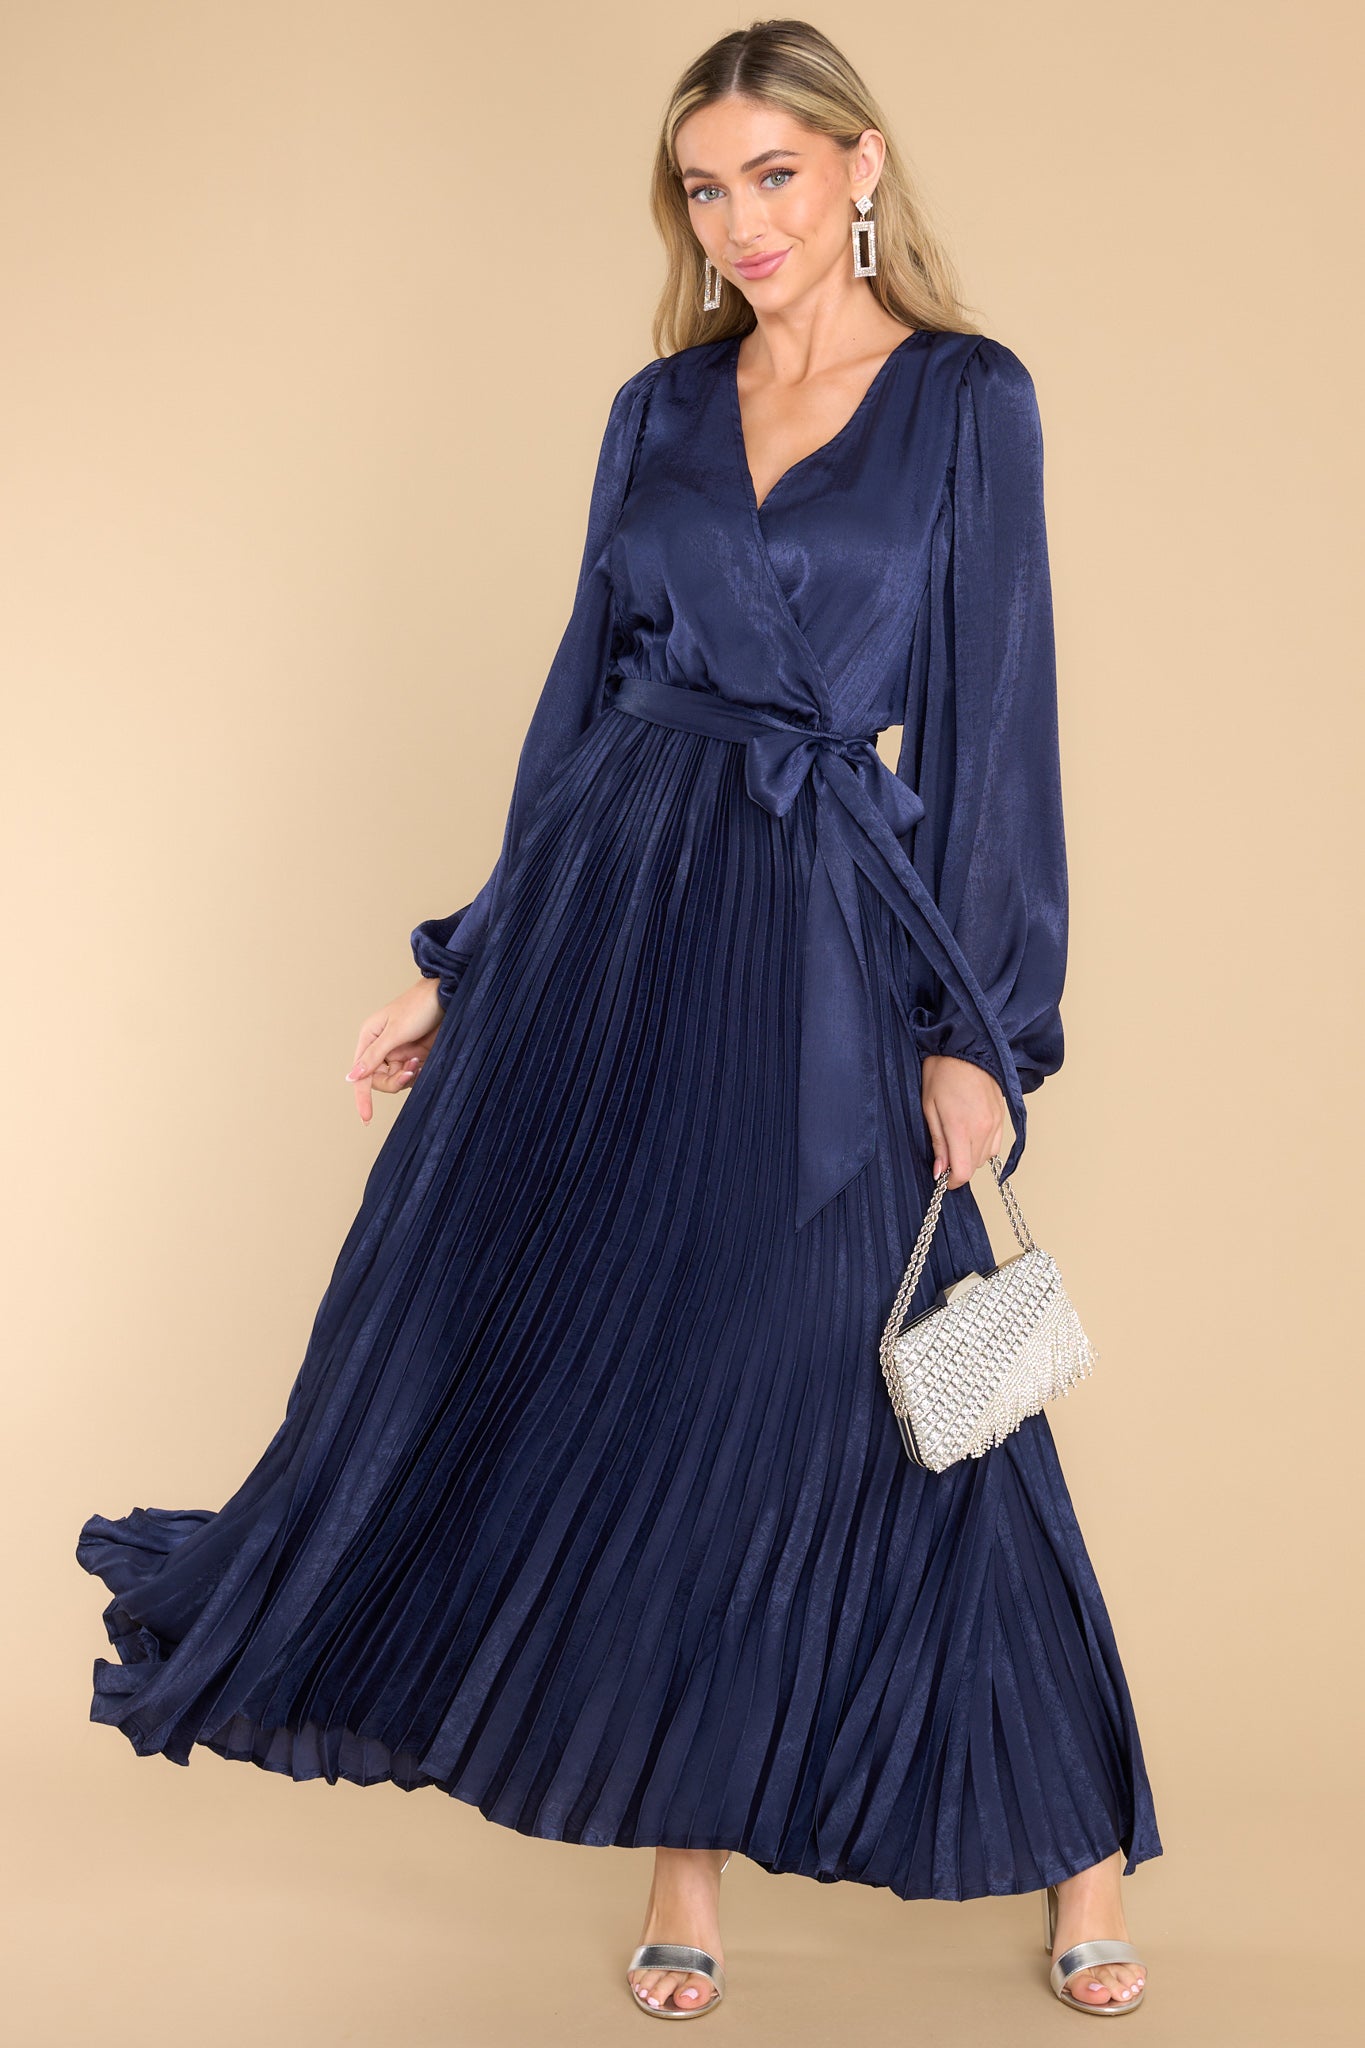 This navy blue dress features a v-neckline with a button clasp, flowy sleeves with elastic cuffs, an elastic waistband, a self-tie, and a pleated skirt. 